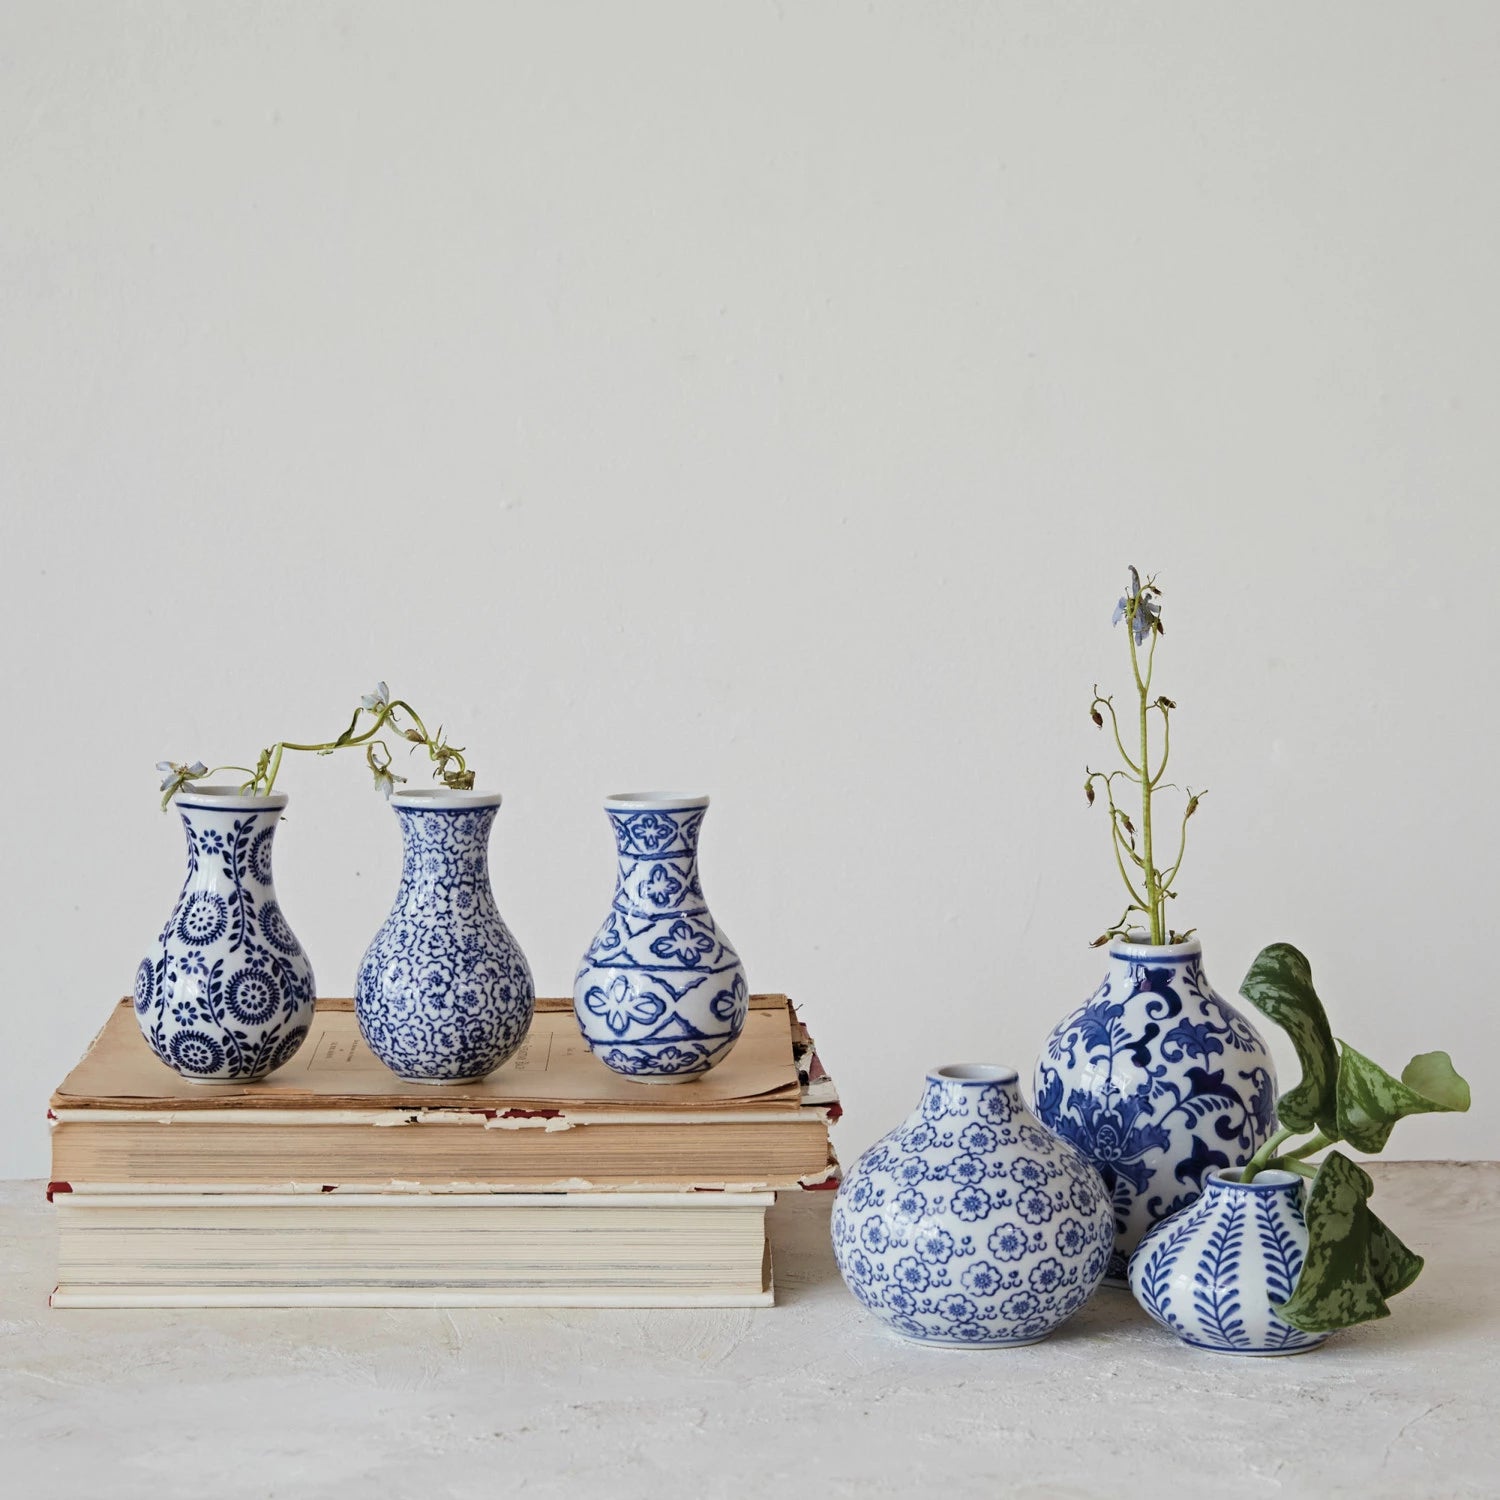 assorted blue and white patterned vases arranged on a shelf with books and greenery.